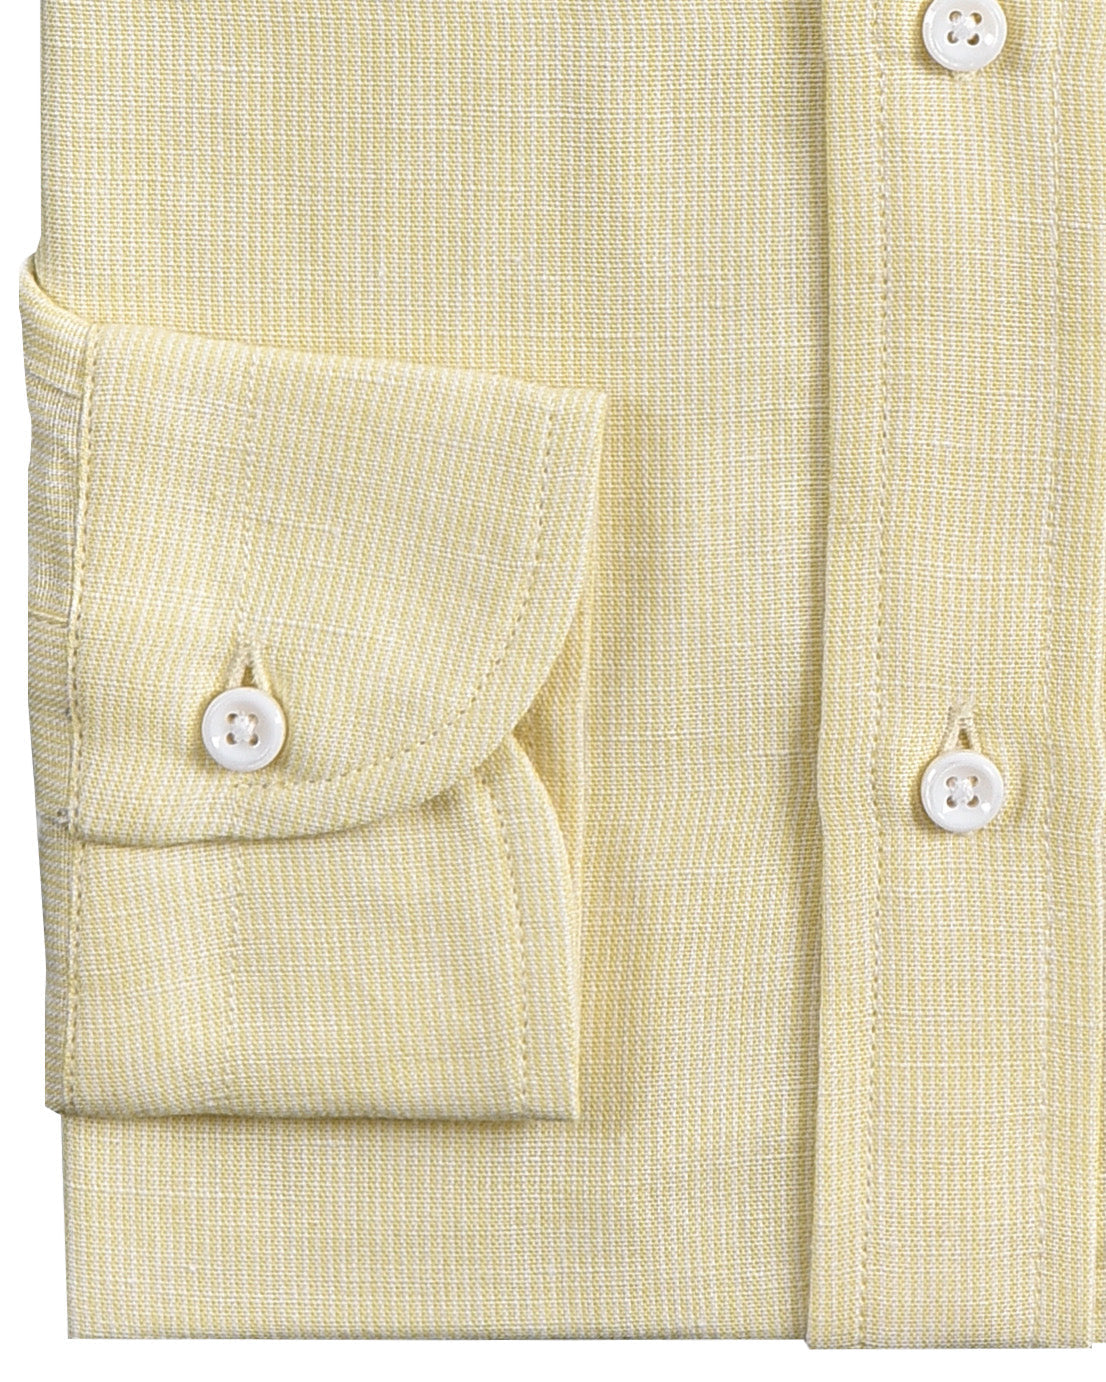 Cuff of the custom linen shirt for men in pastel yellow by Luxire Clothing